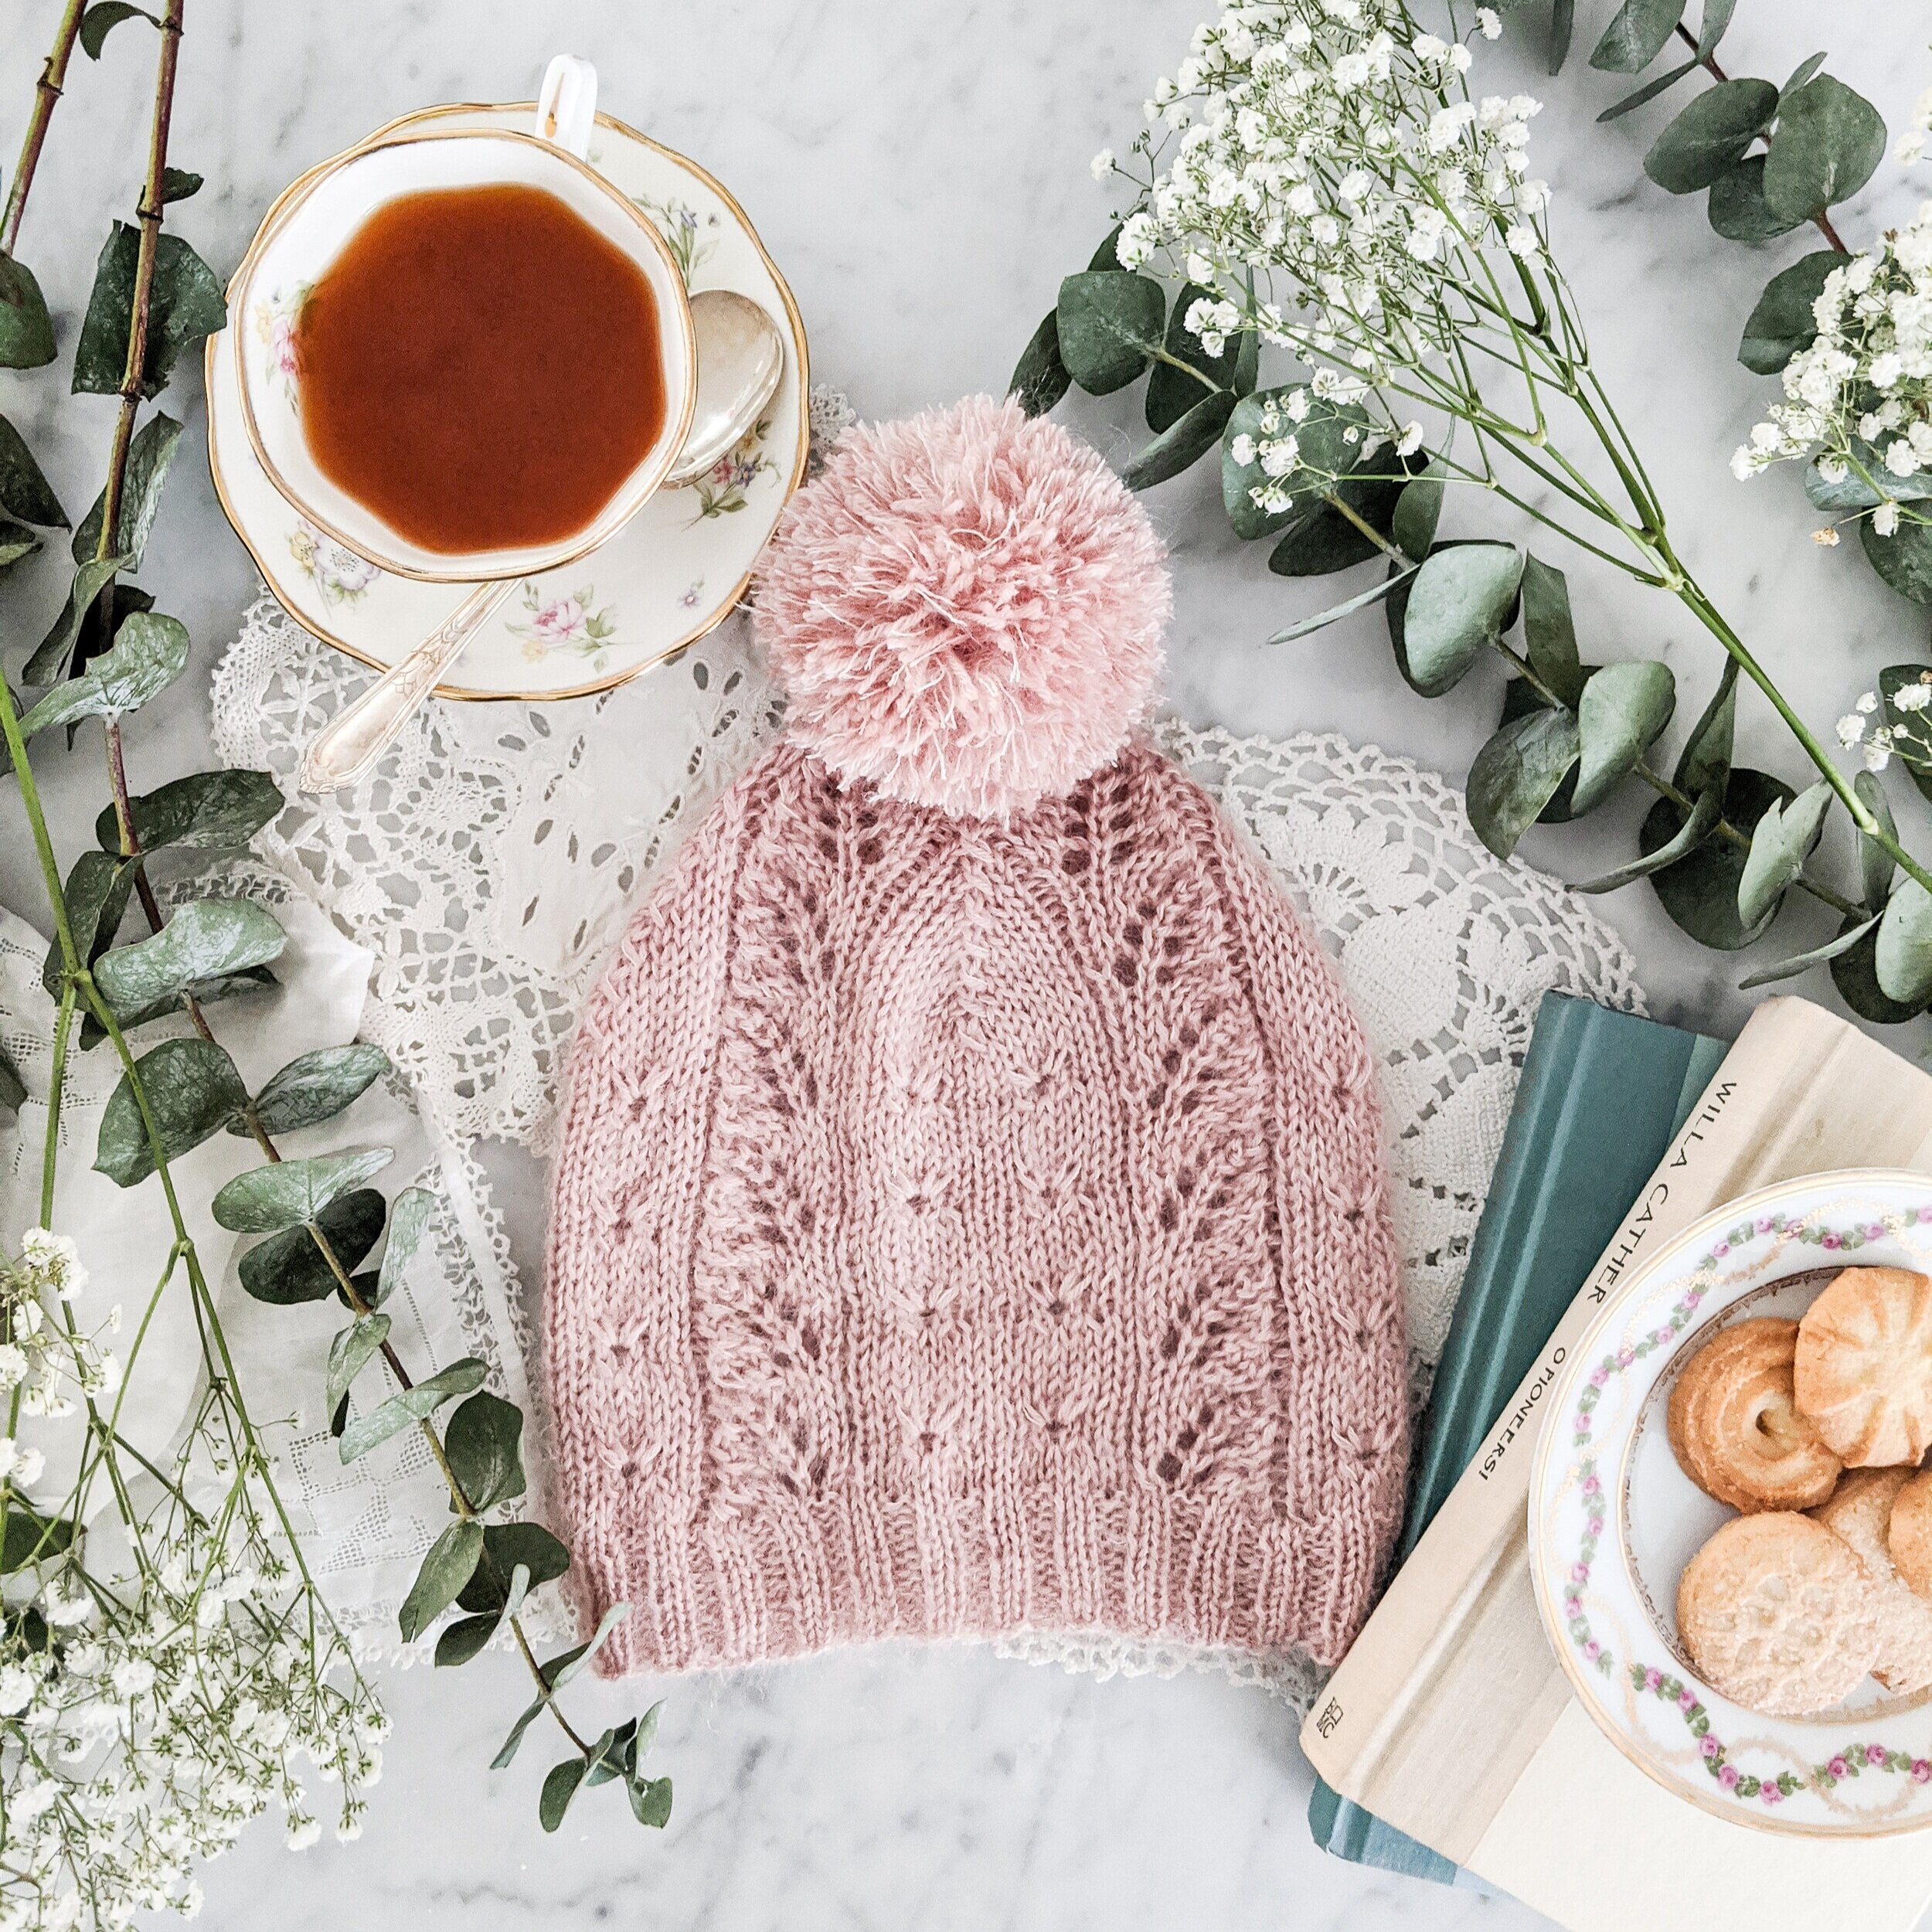 Where Can I Buy Knitting Patterns Near Me